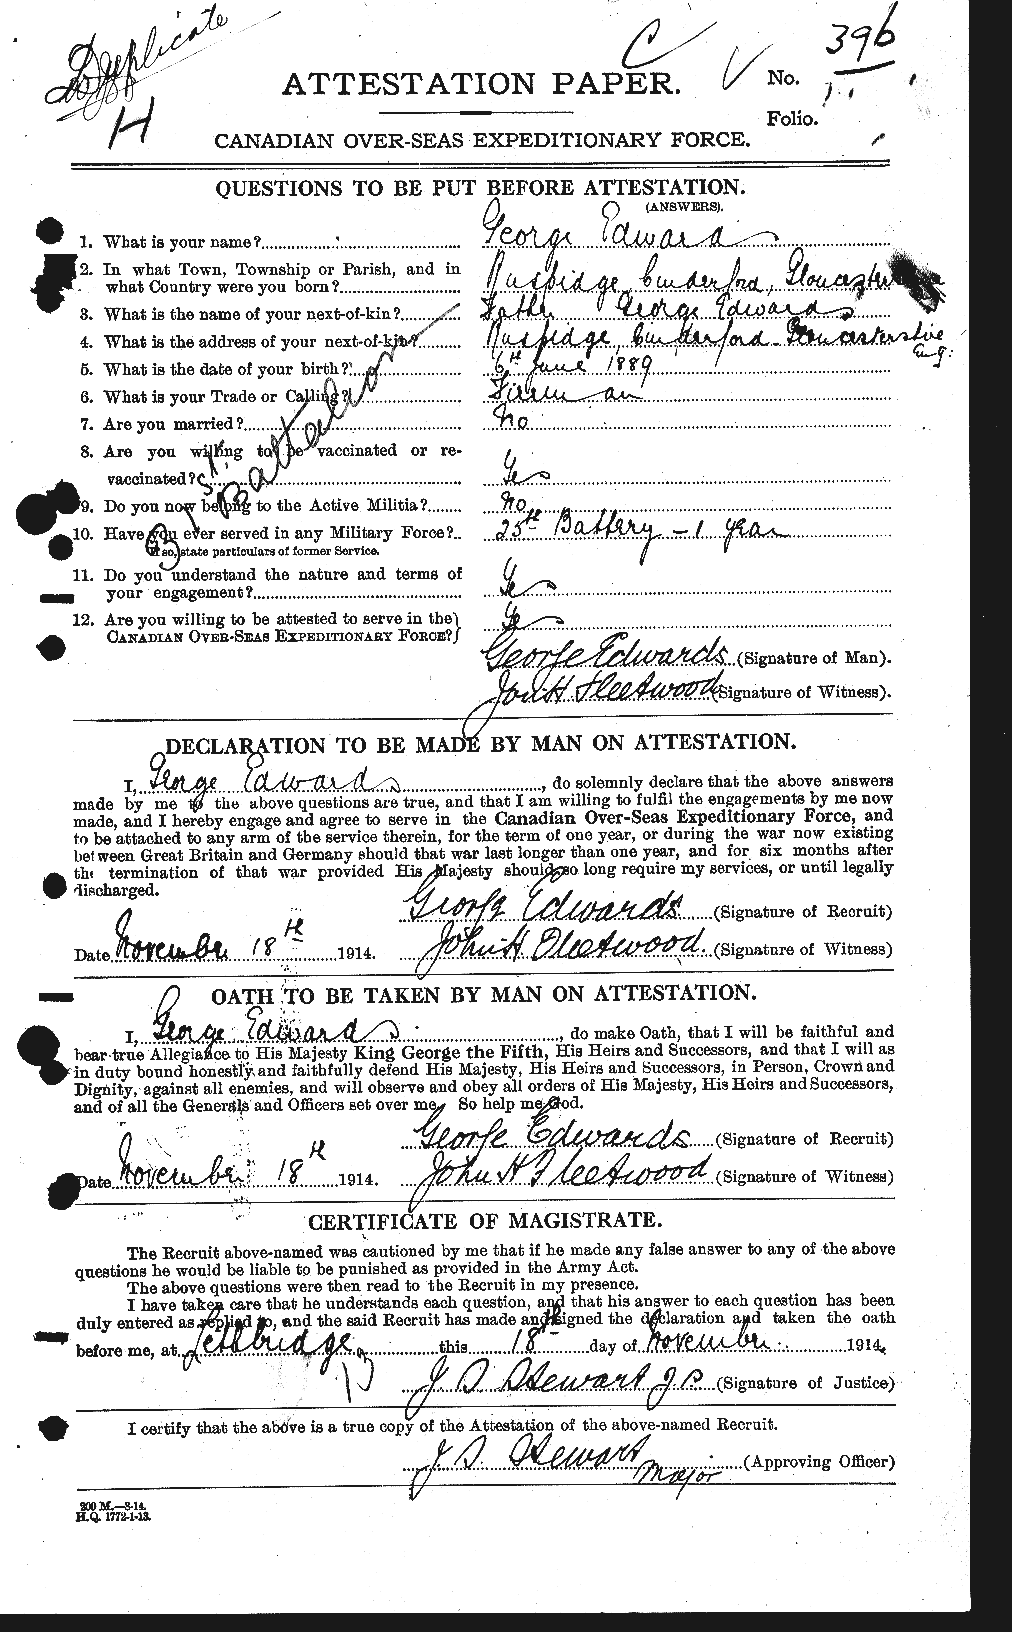 Personnel Records of the First World War - CEF 309094a